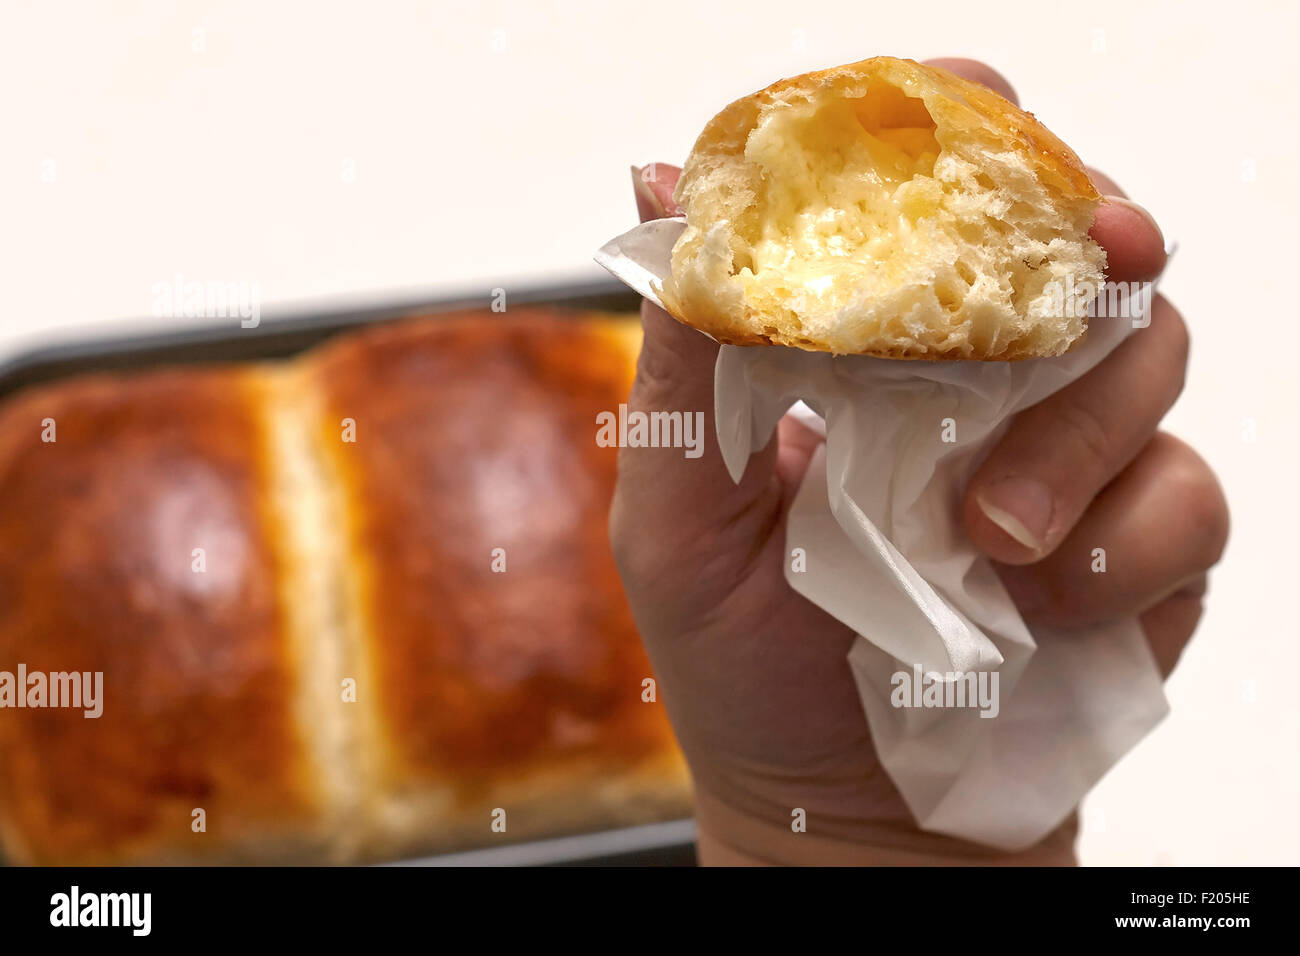 Ladies hand holding up a buttered portion of home baked bread over a baked loaf in the back ground Stock Photo